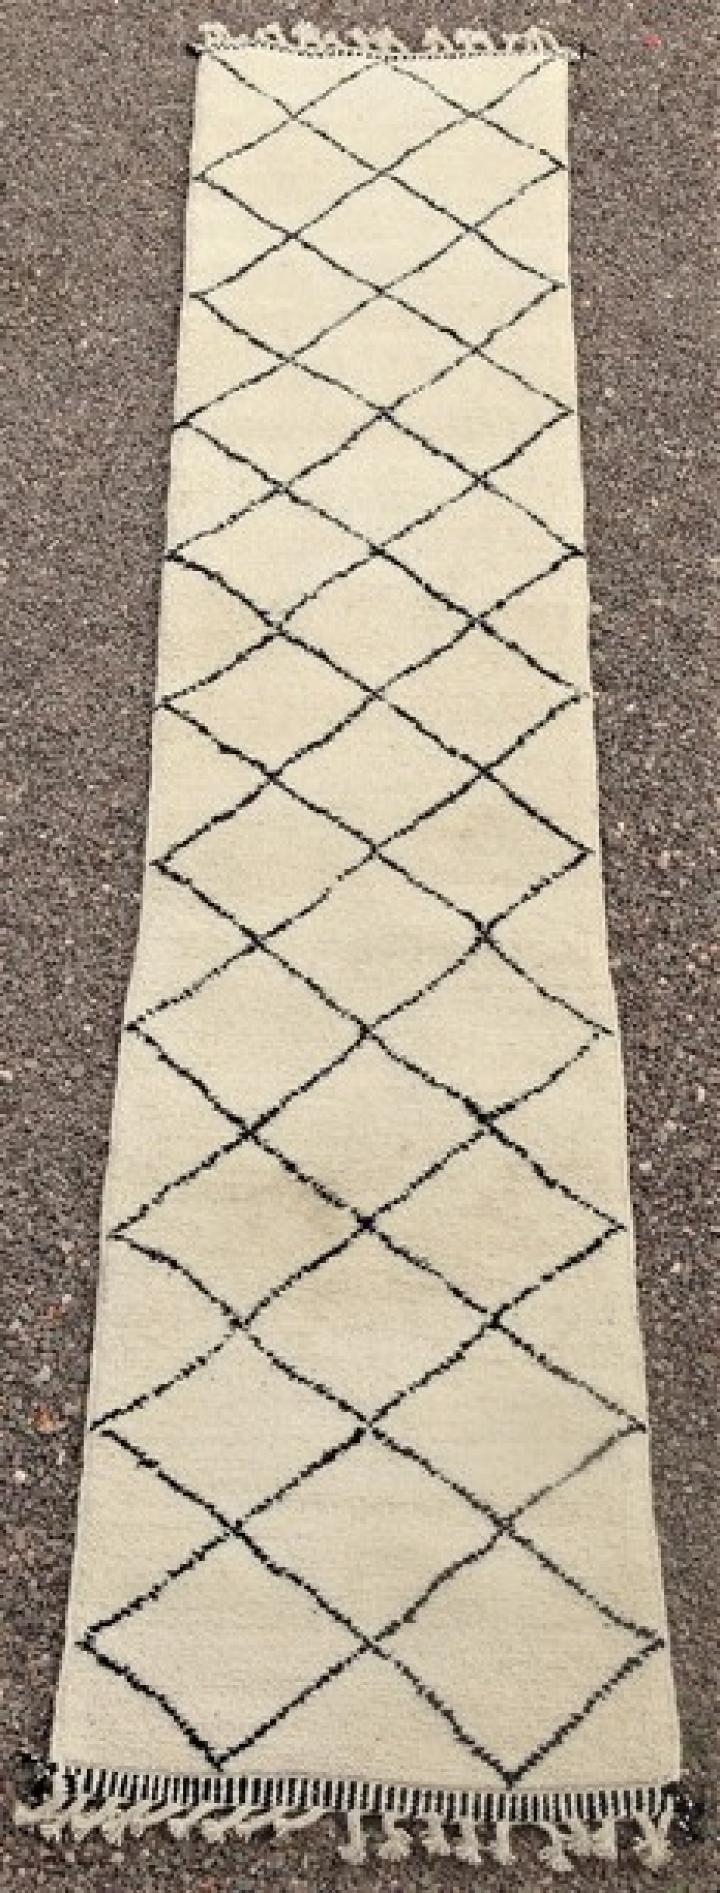 Berber rug #BO51122 from the Beni Ourain Large sizes catalog